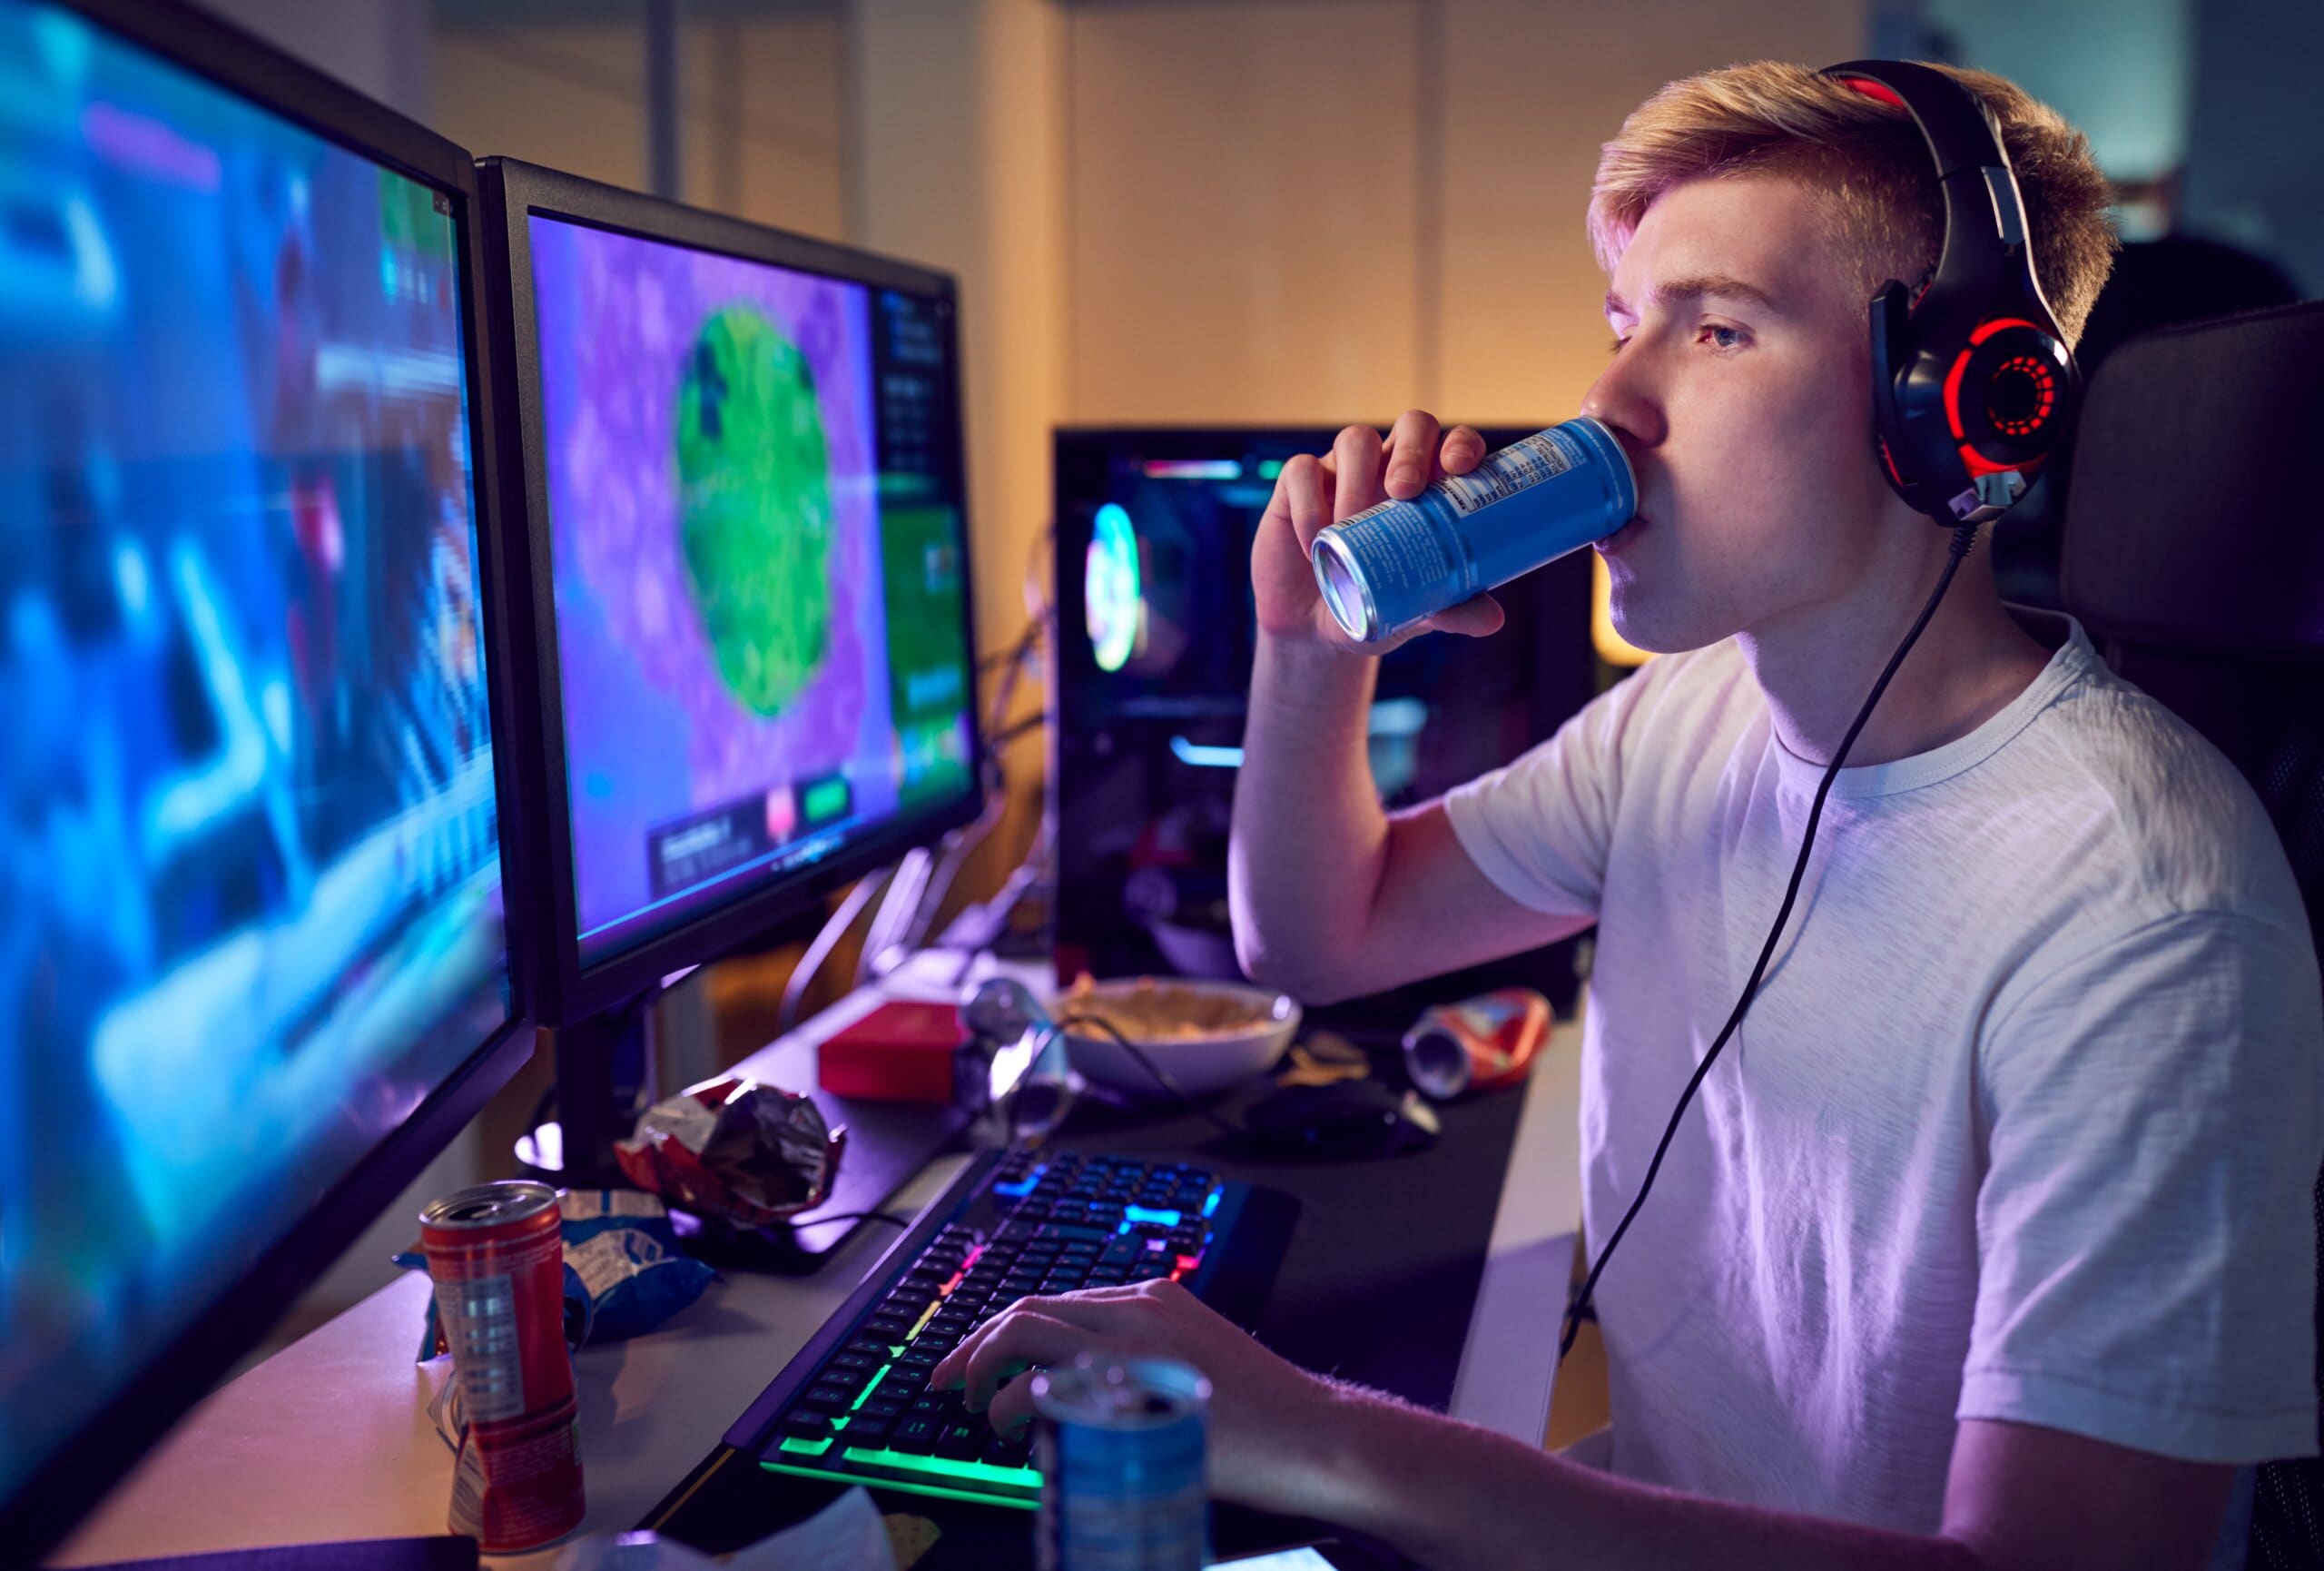 Teenage boy pulling an all nighter playing video games and drinking energy drinks.